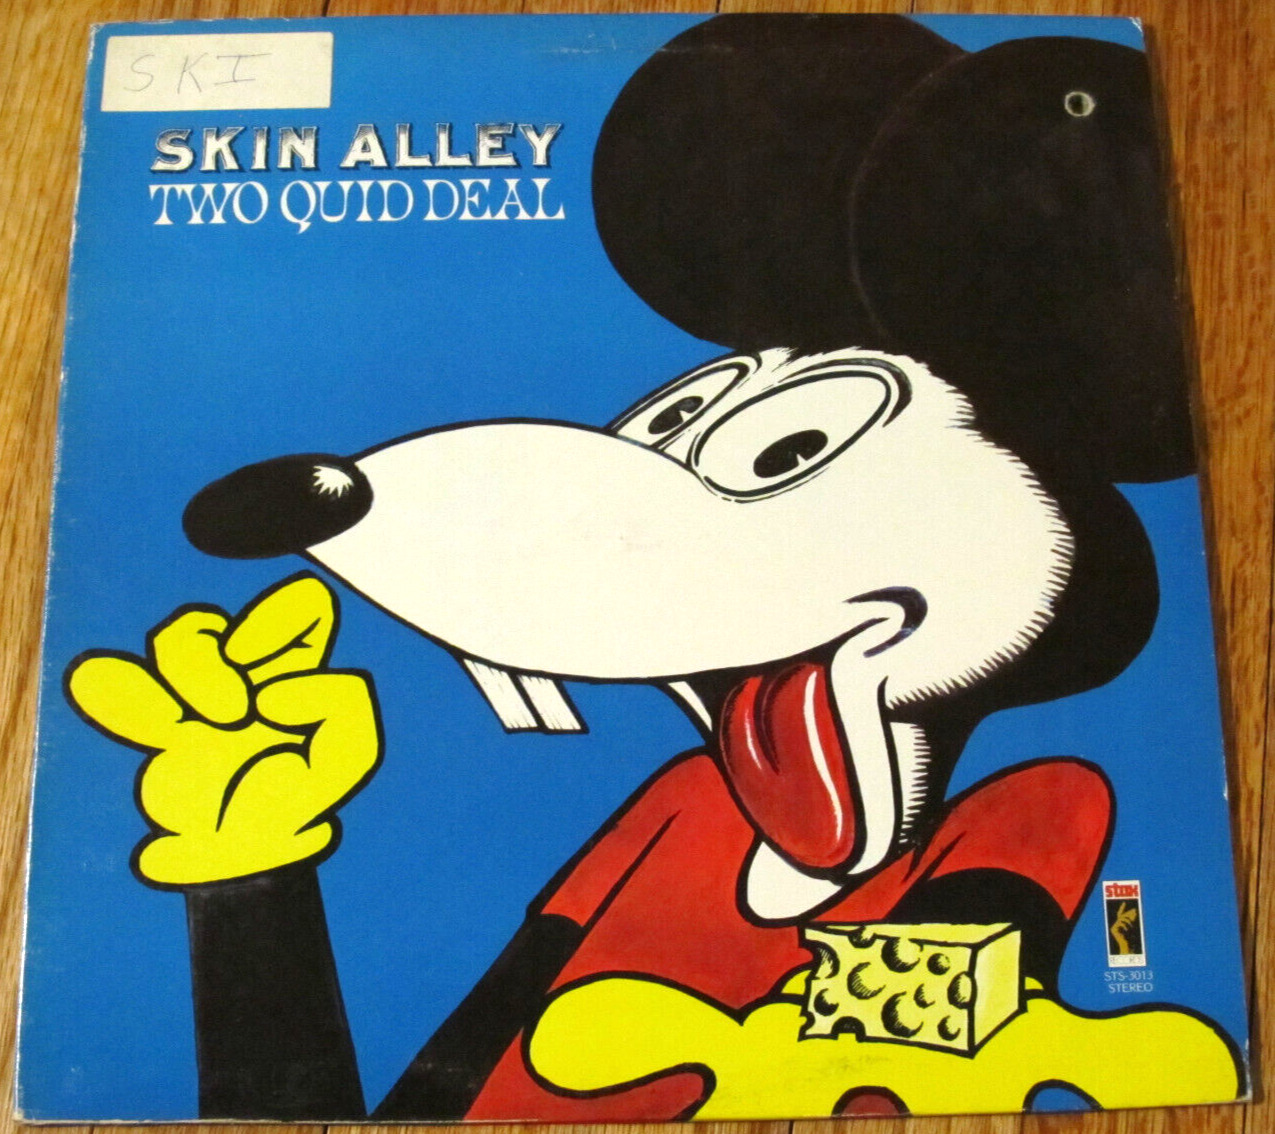 SKIN ALLEY-Two Quid Deal~ORIG.1973 STAX PROMO Vinyl LP~STS-3013~FUNK PSYCH ROCK